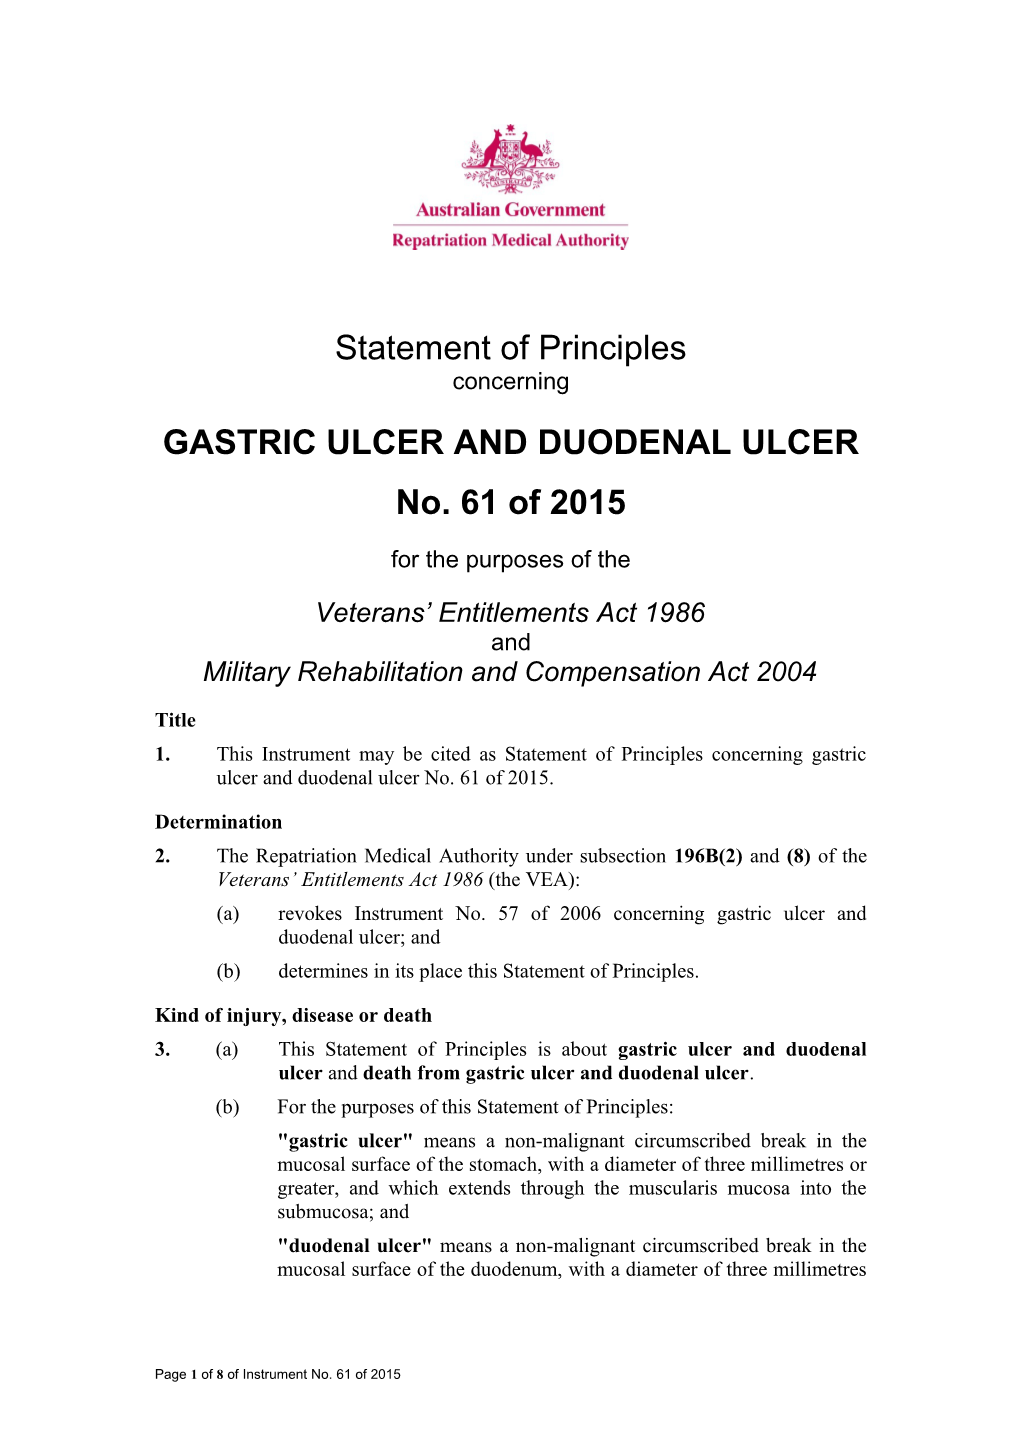 Gastric Ulcer and Duodenal Ulcer